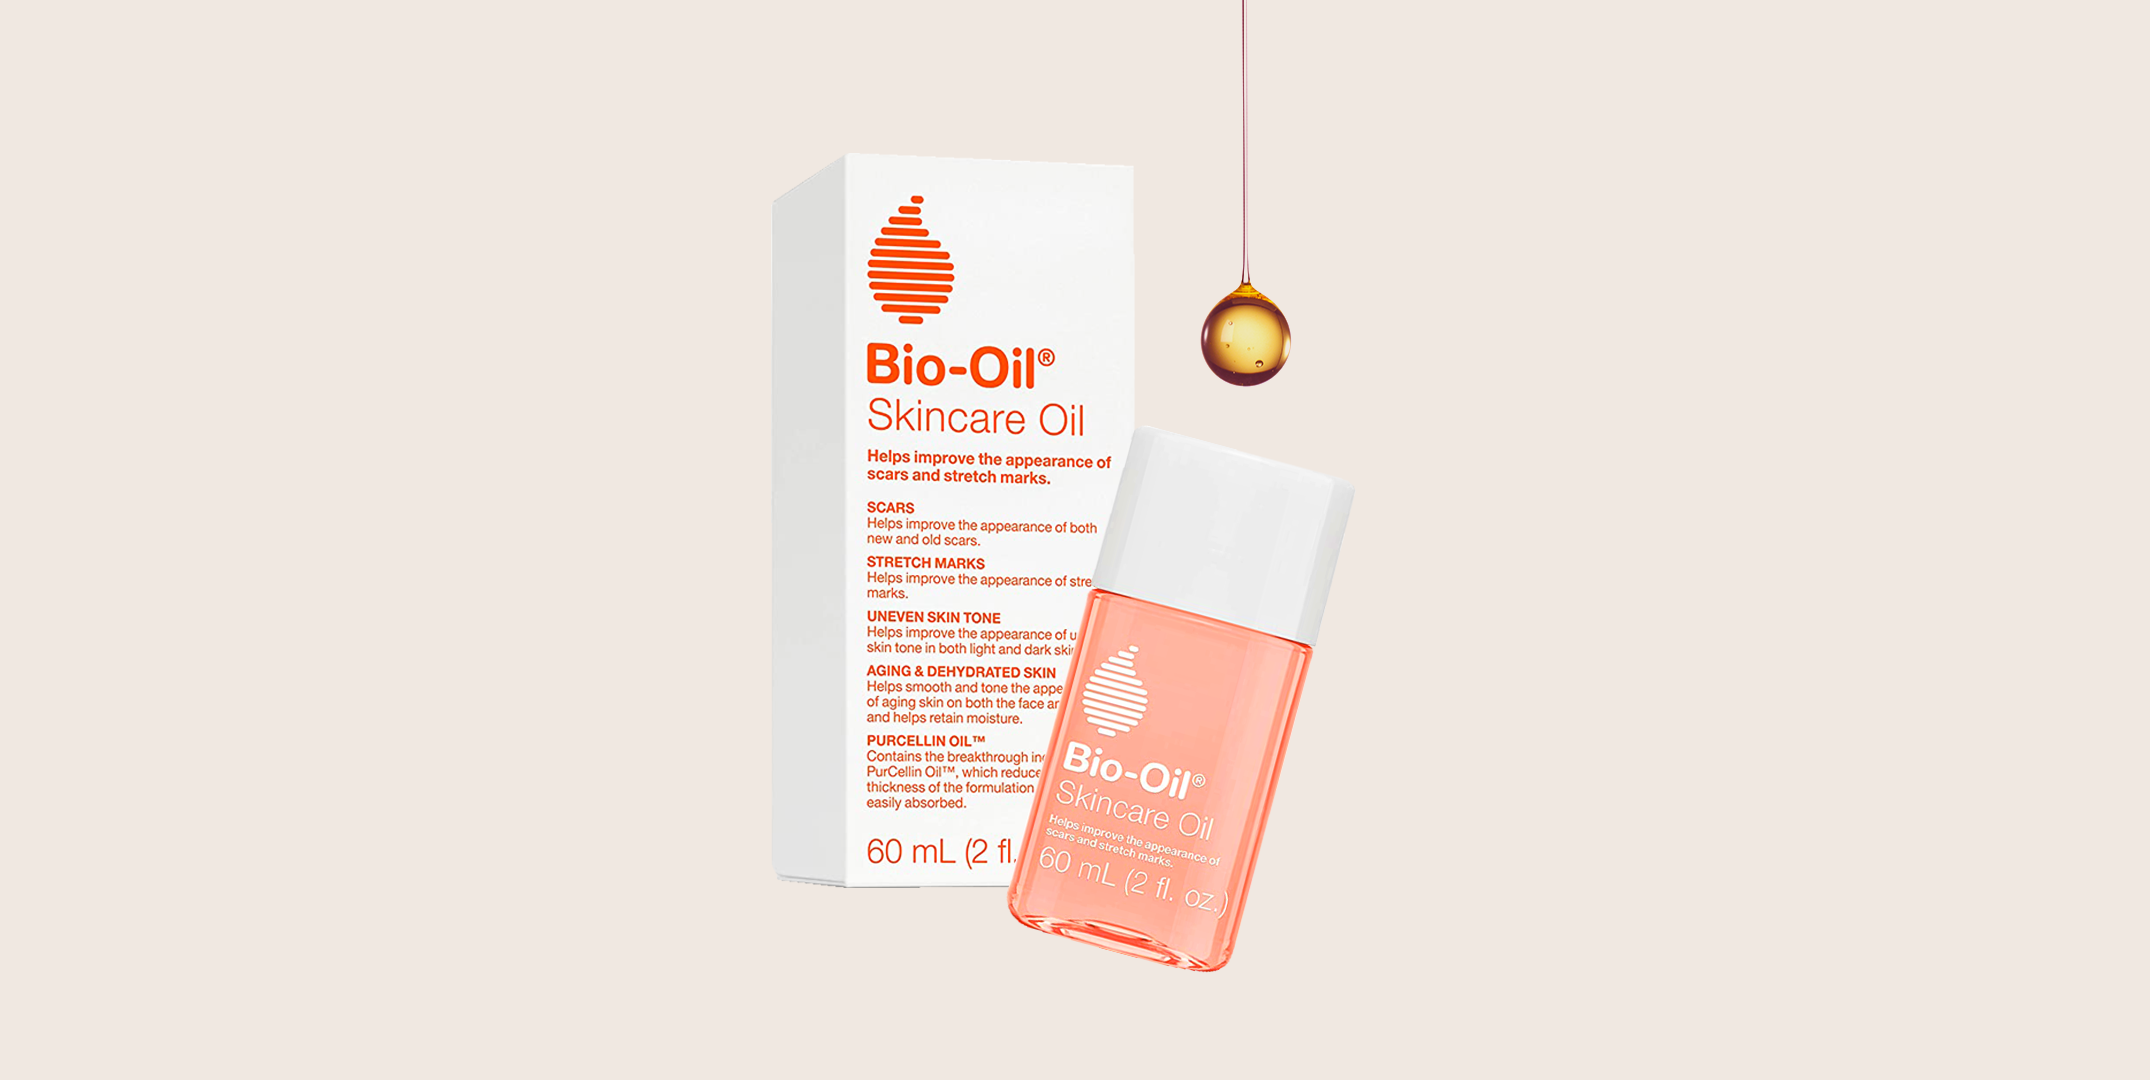 Pakistaans Knipoog Temerity An Honest Bio Oil Review for Improving Scars and Stretch Marks 2022